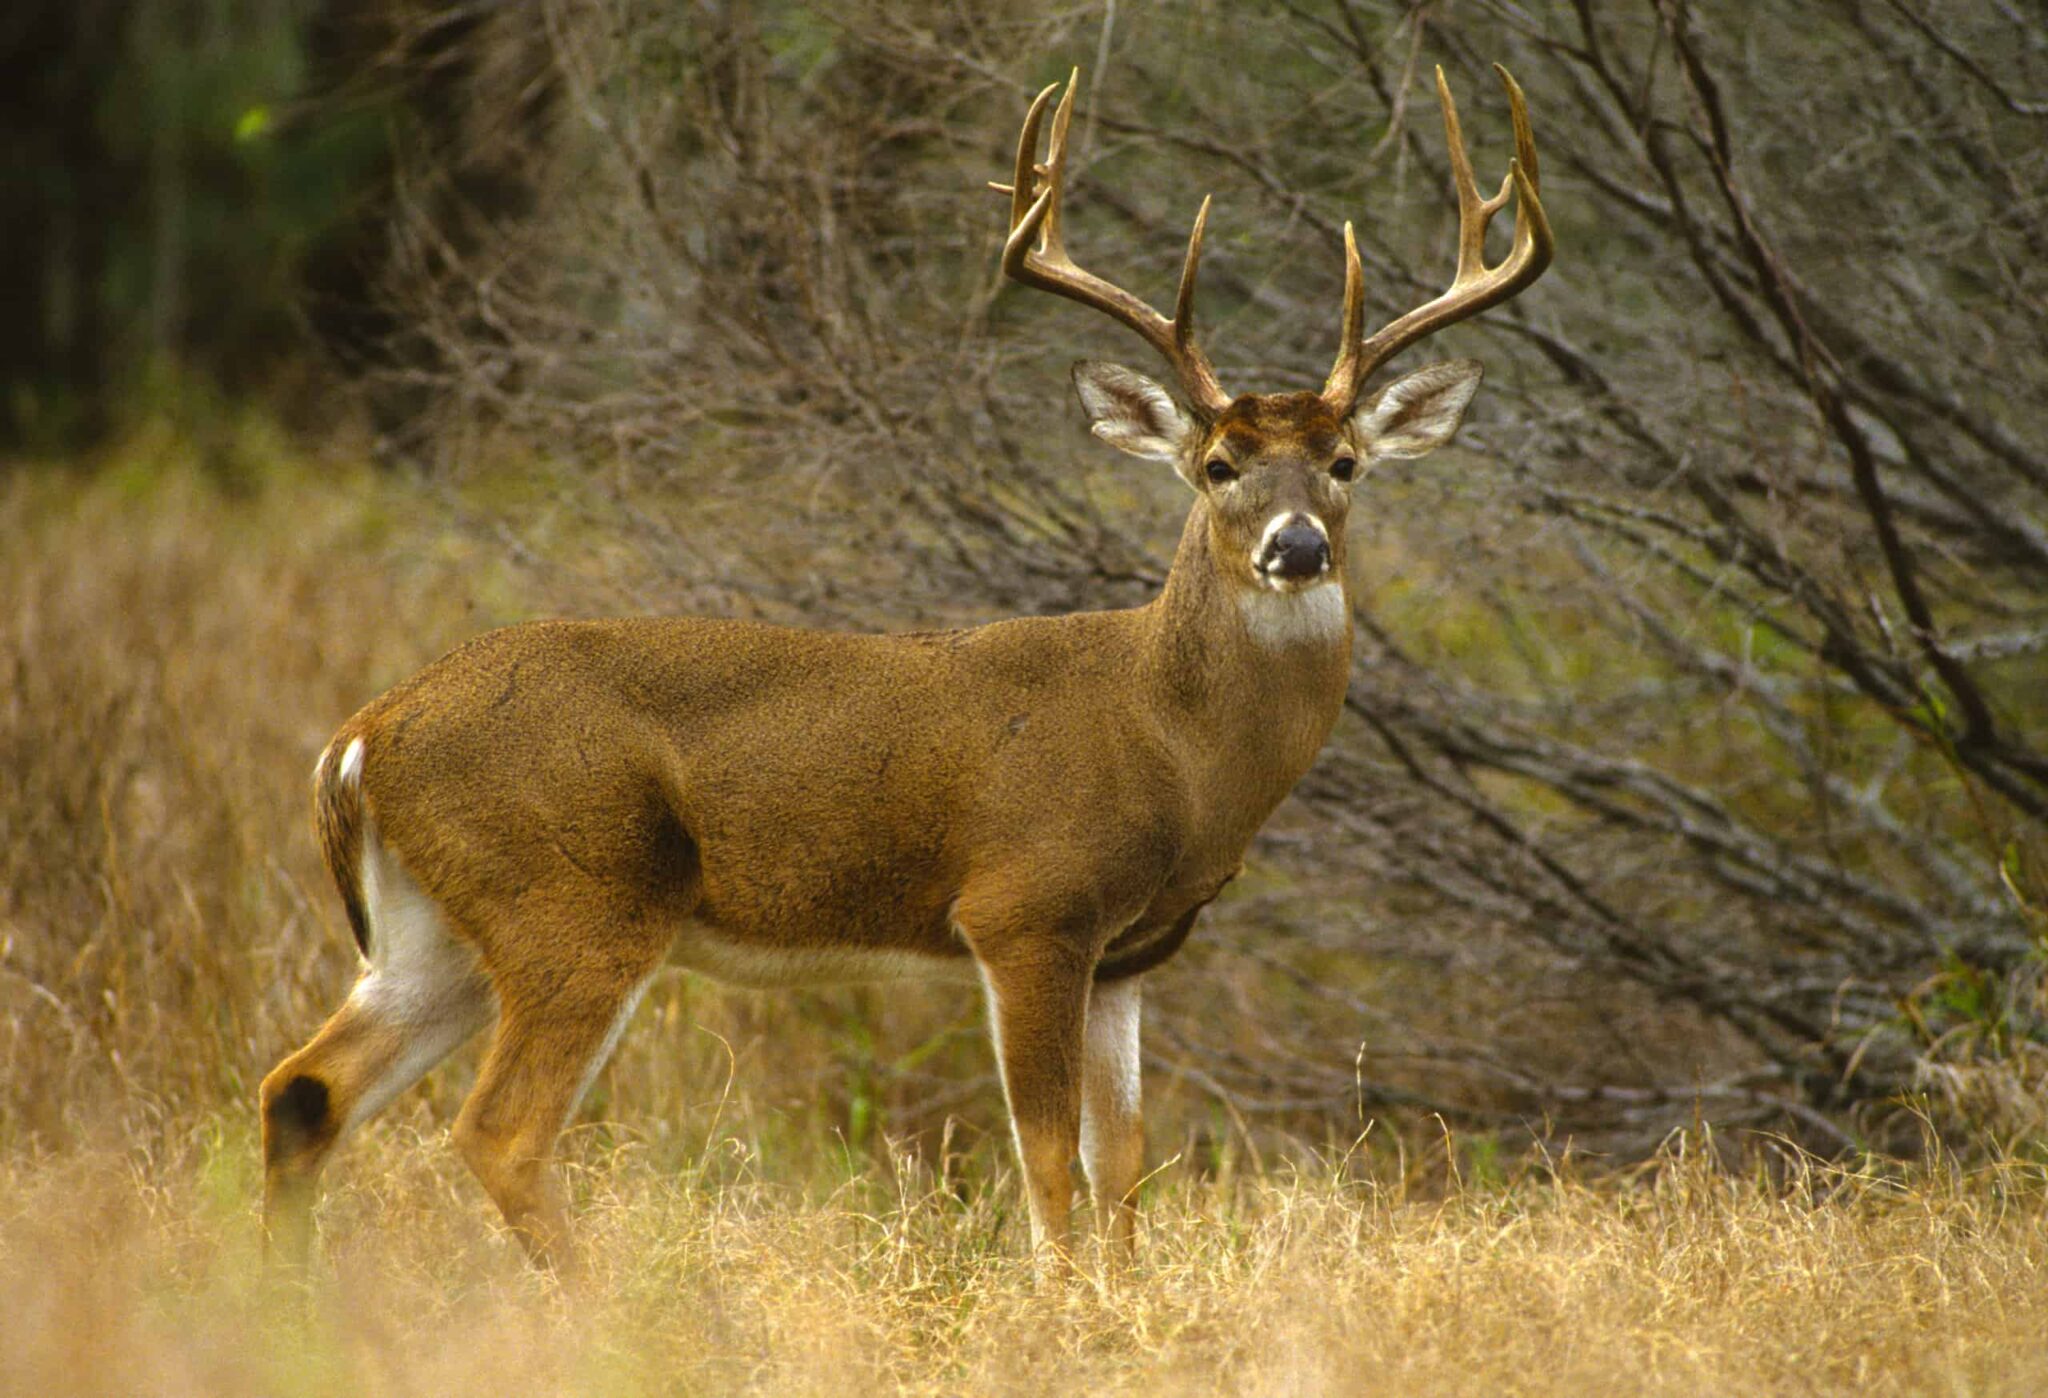 Deer Season In Missouri Everything You Need To Know To Be Prepared